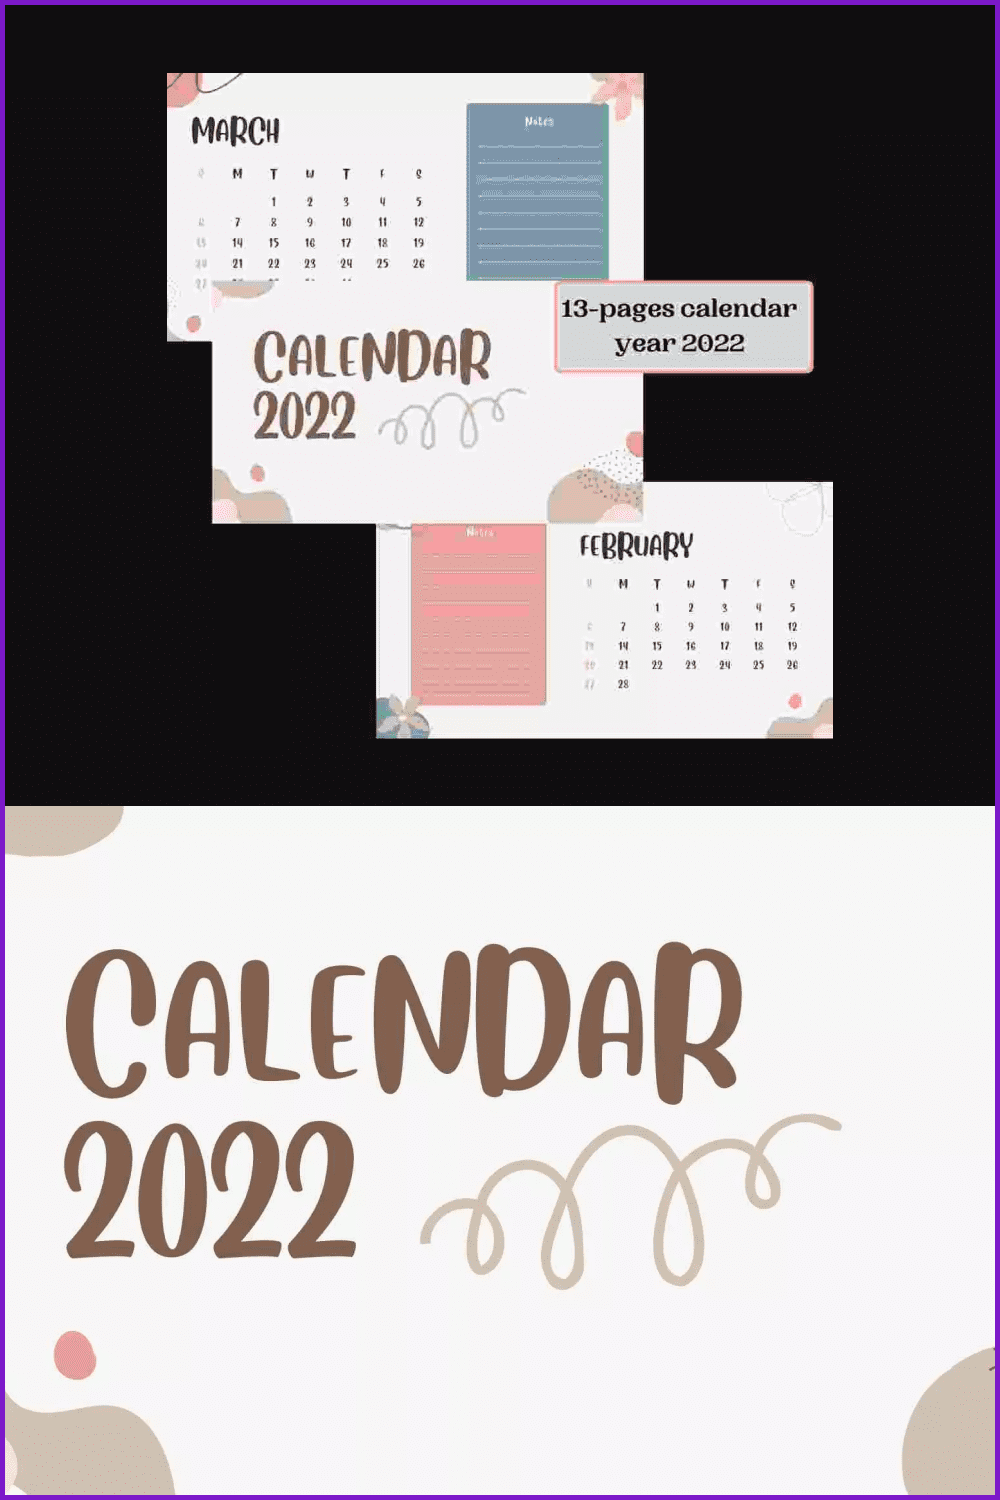 High-quality pastel calendar with note field.